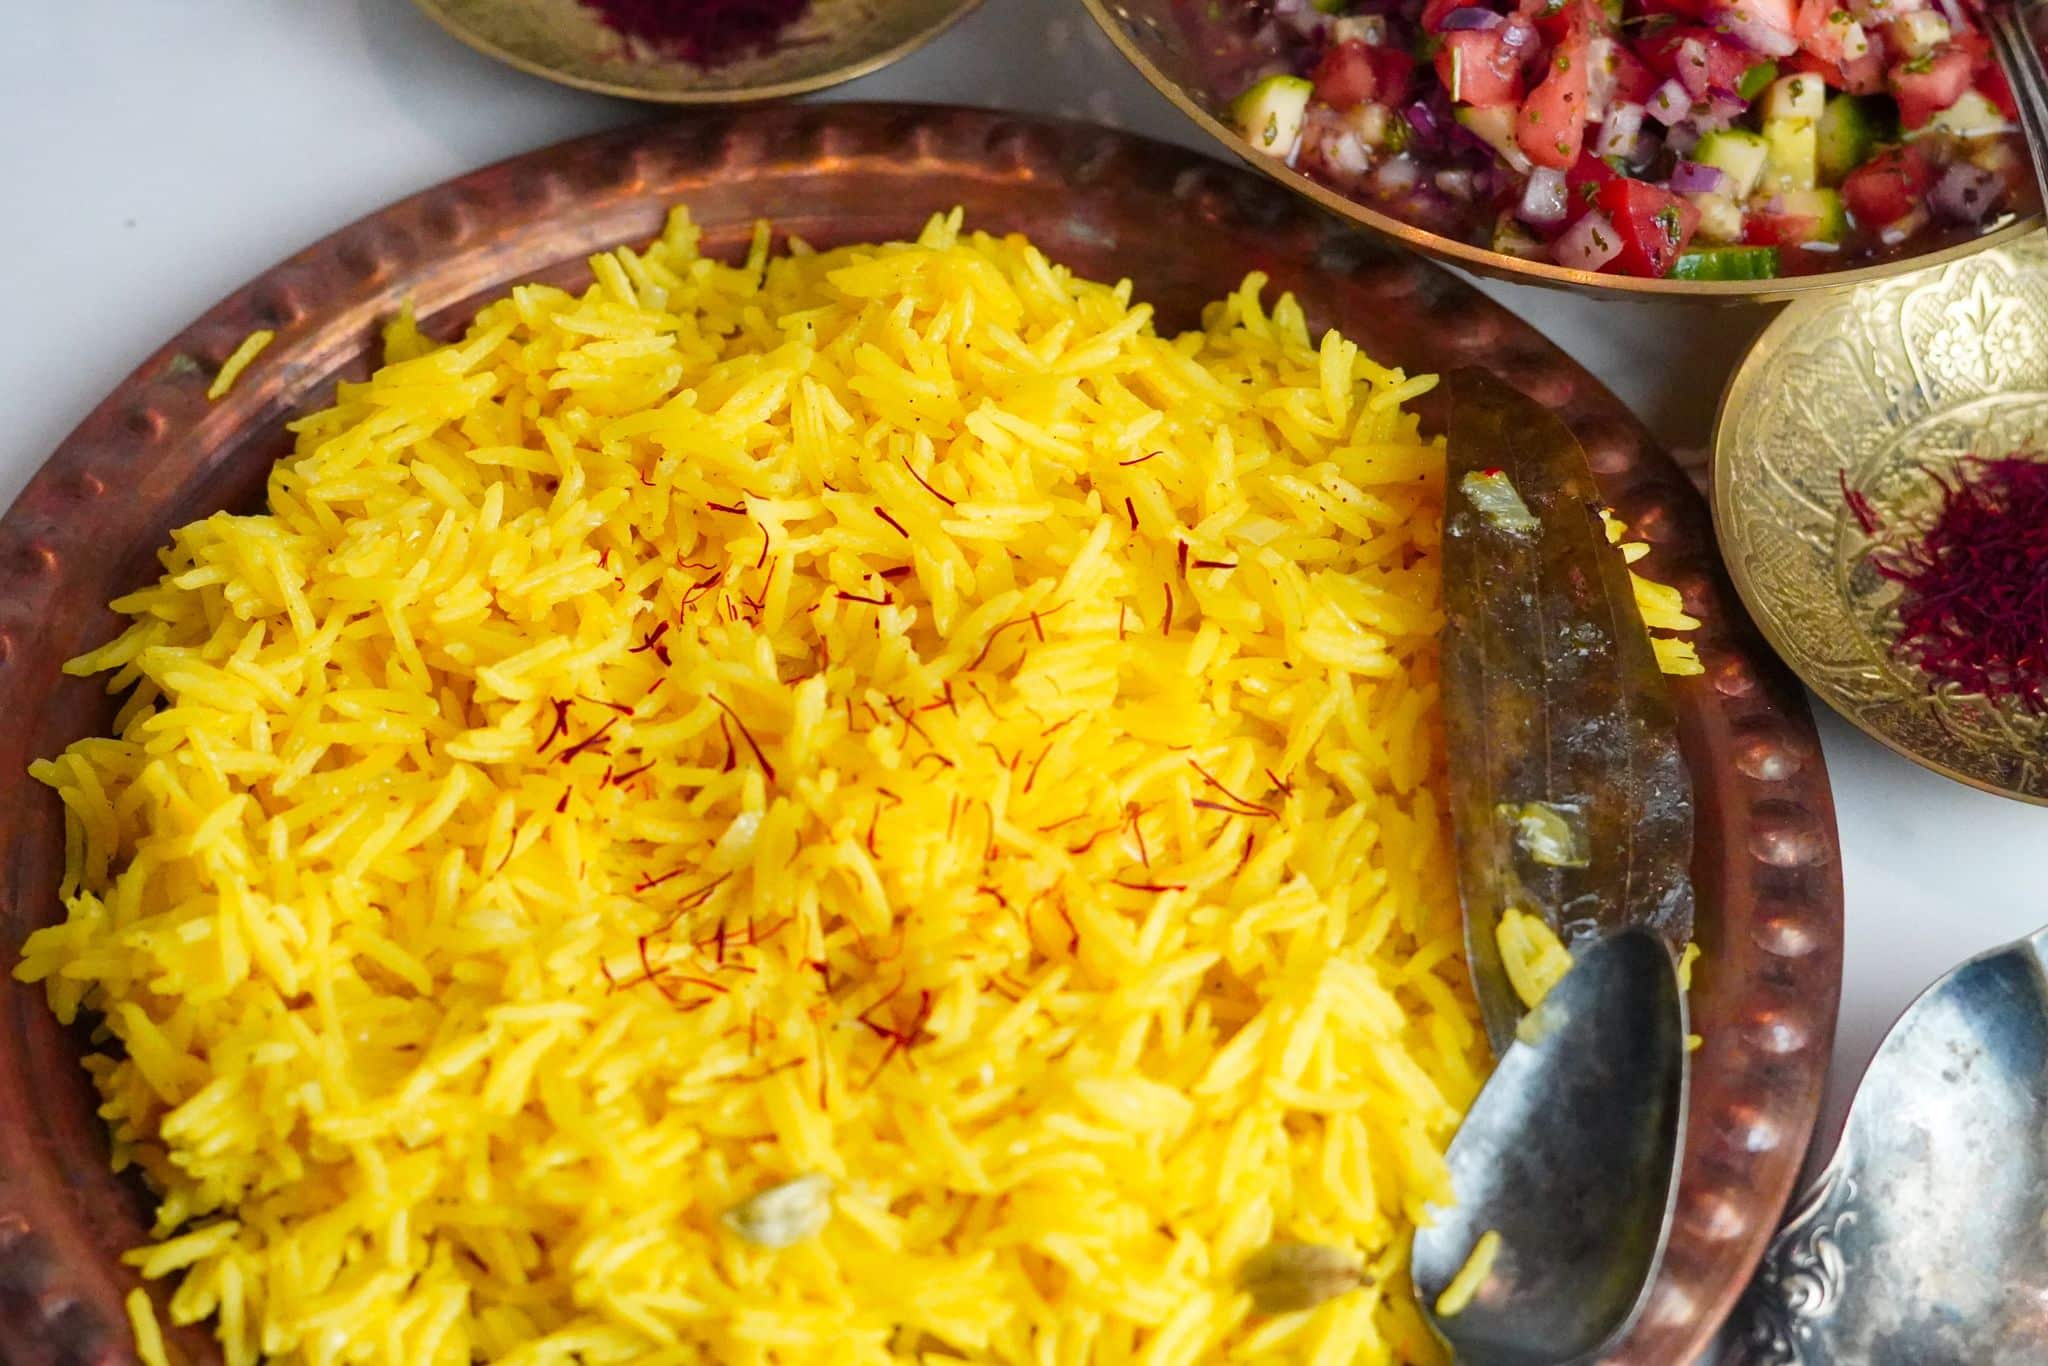 Yellow saffron rice, garnished with vibrant red saffron threads is set within fancy, traditional copper plates with a salad on the side.